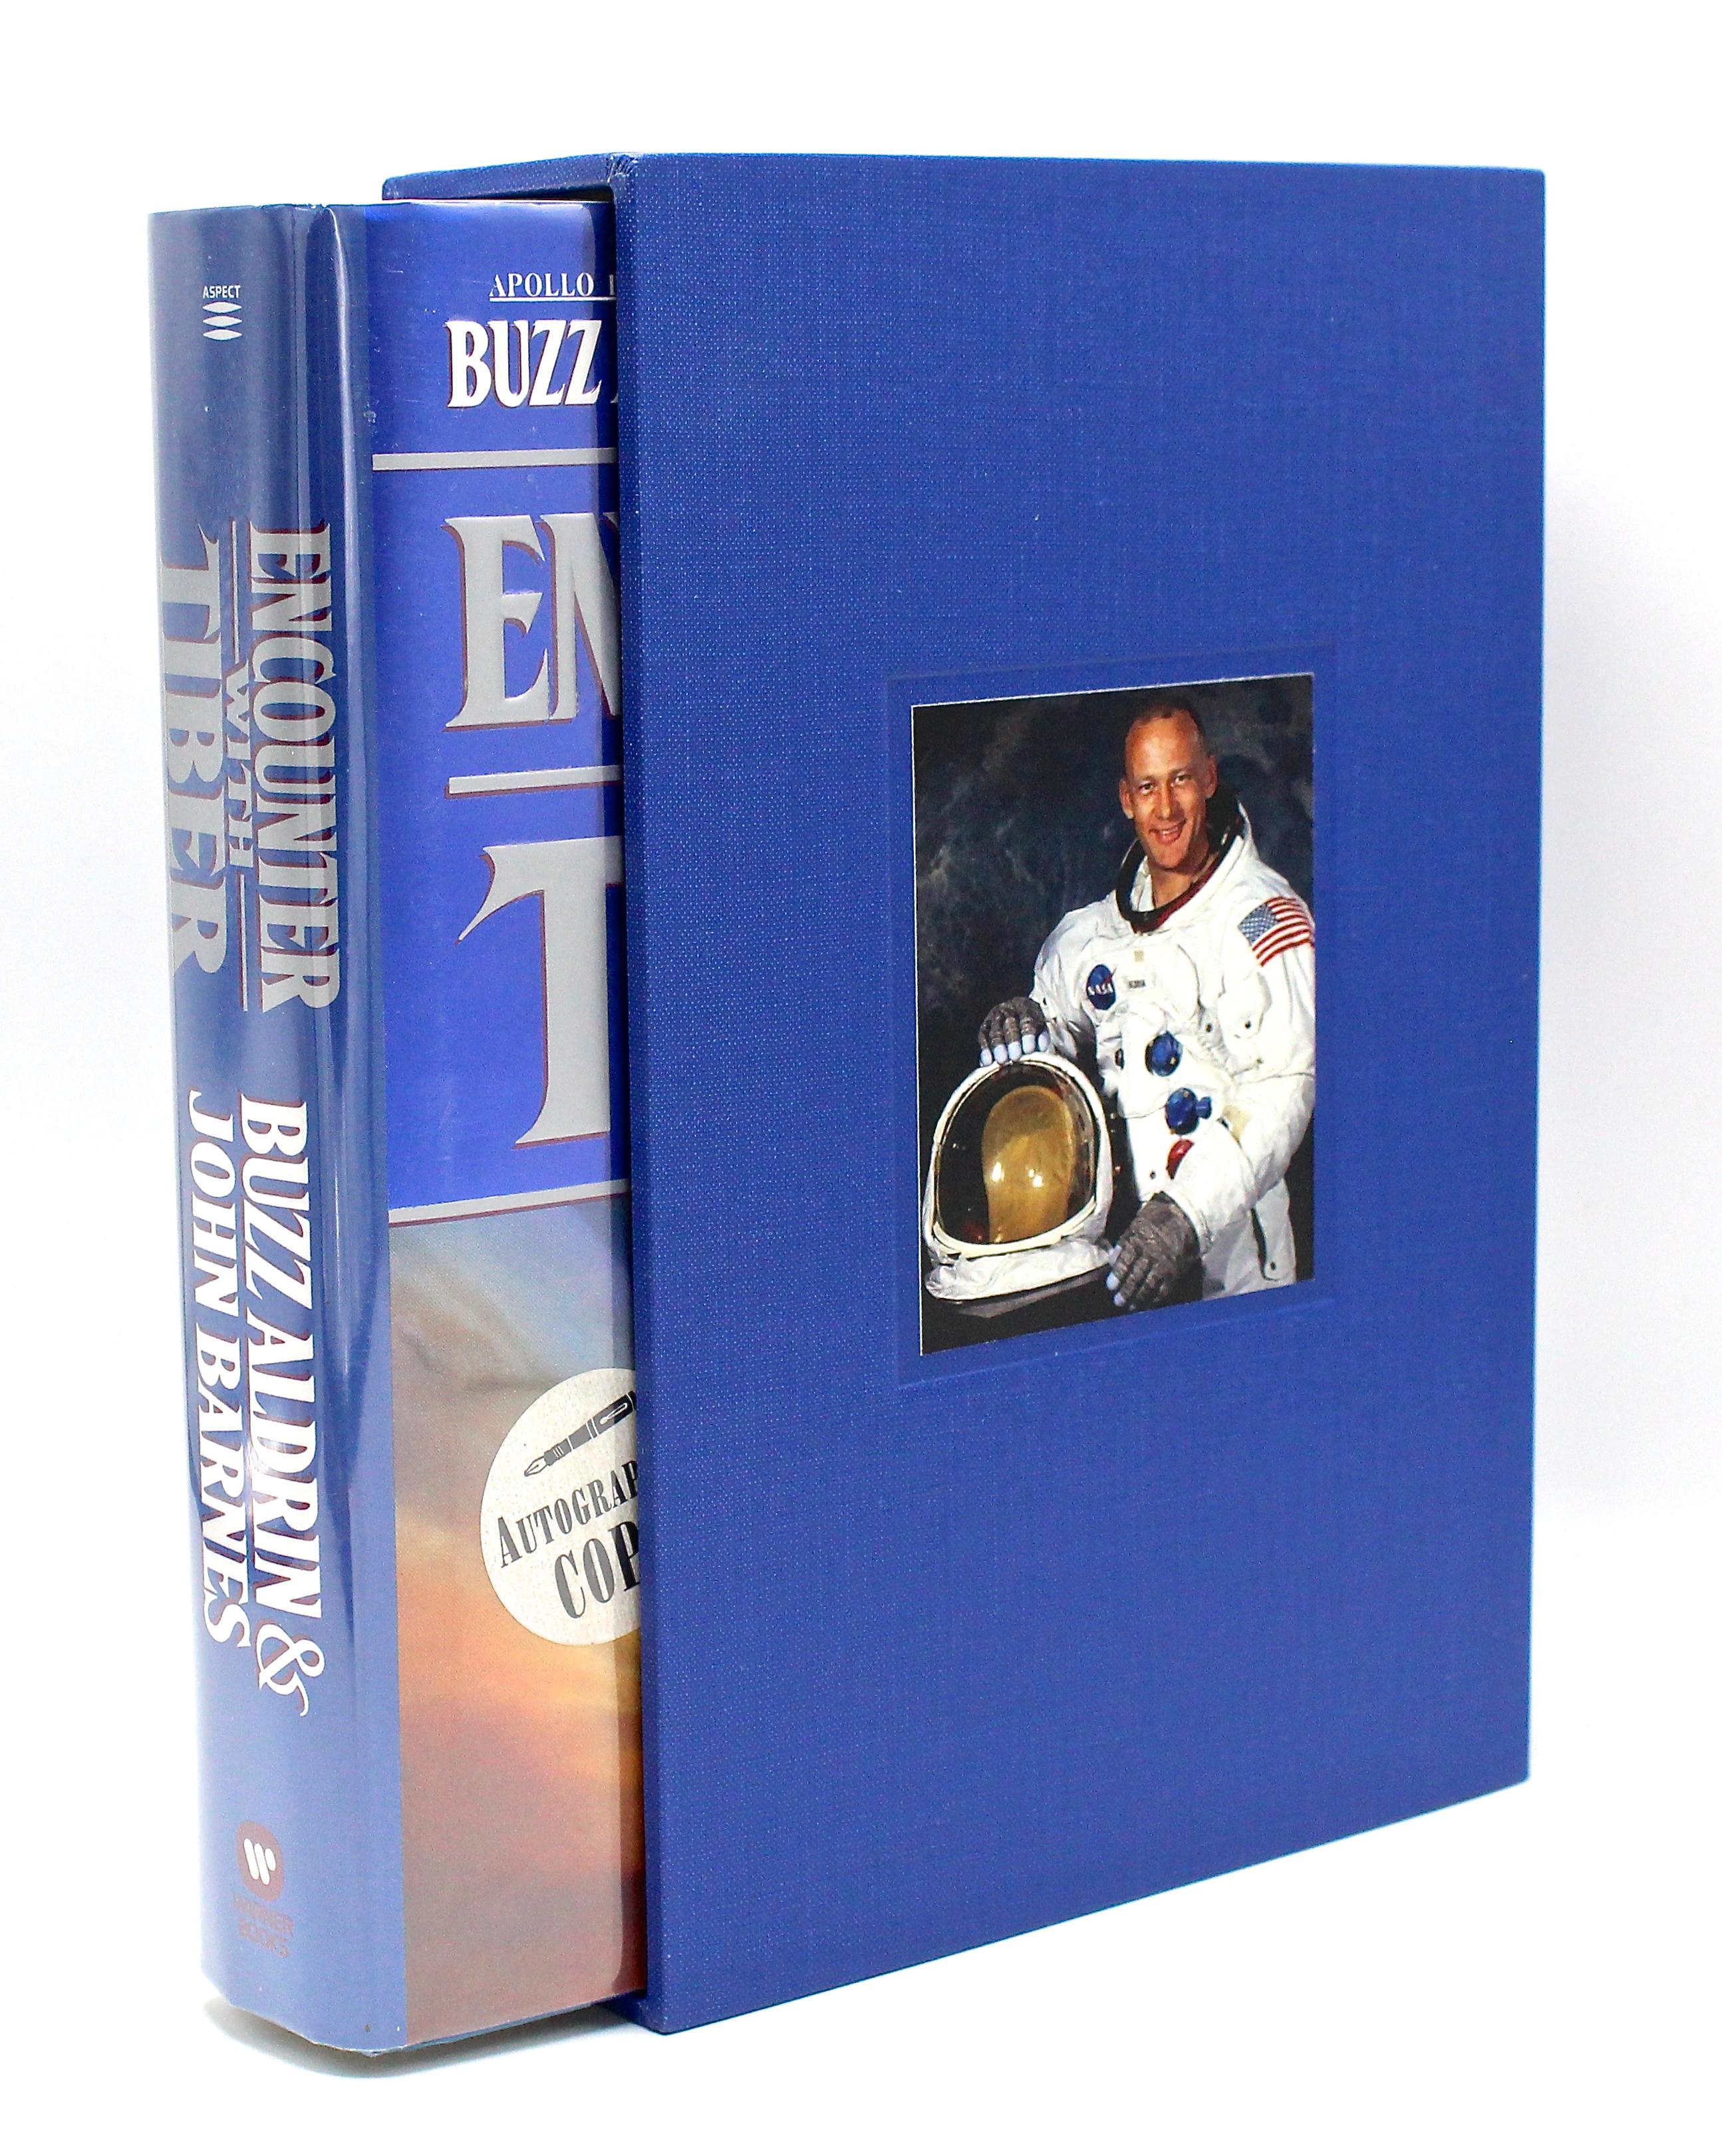 American Encounter with Tiber by Buzz Aldrin and John Barnes, Signed First Edition, 1996